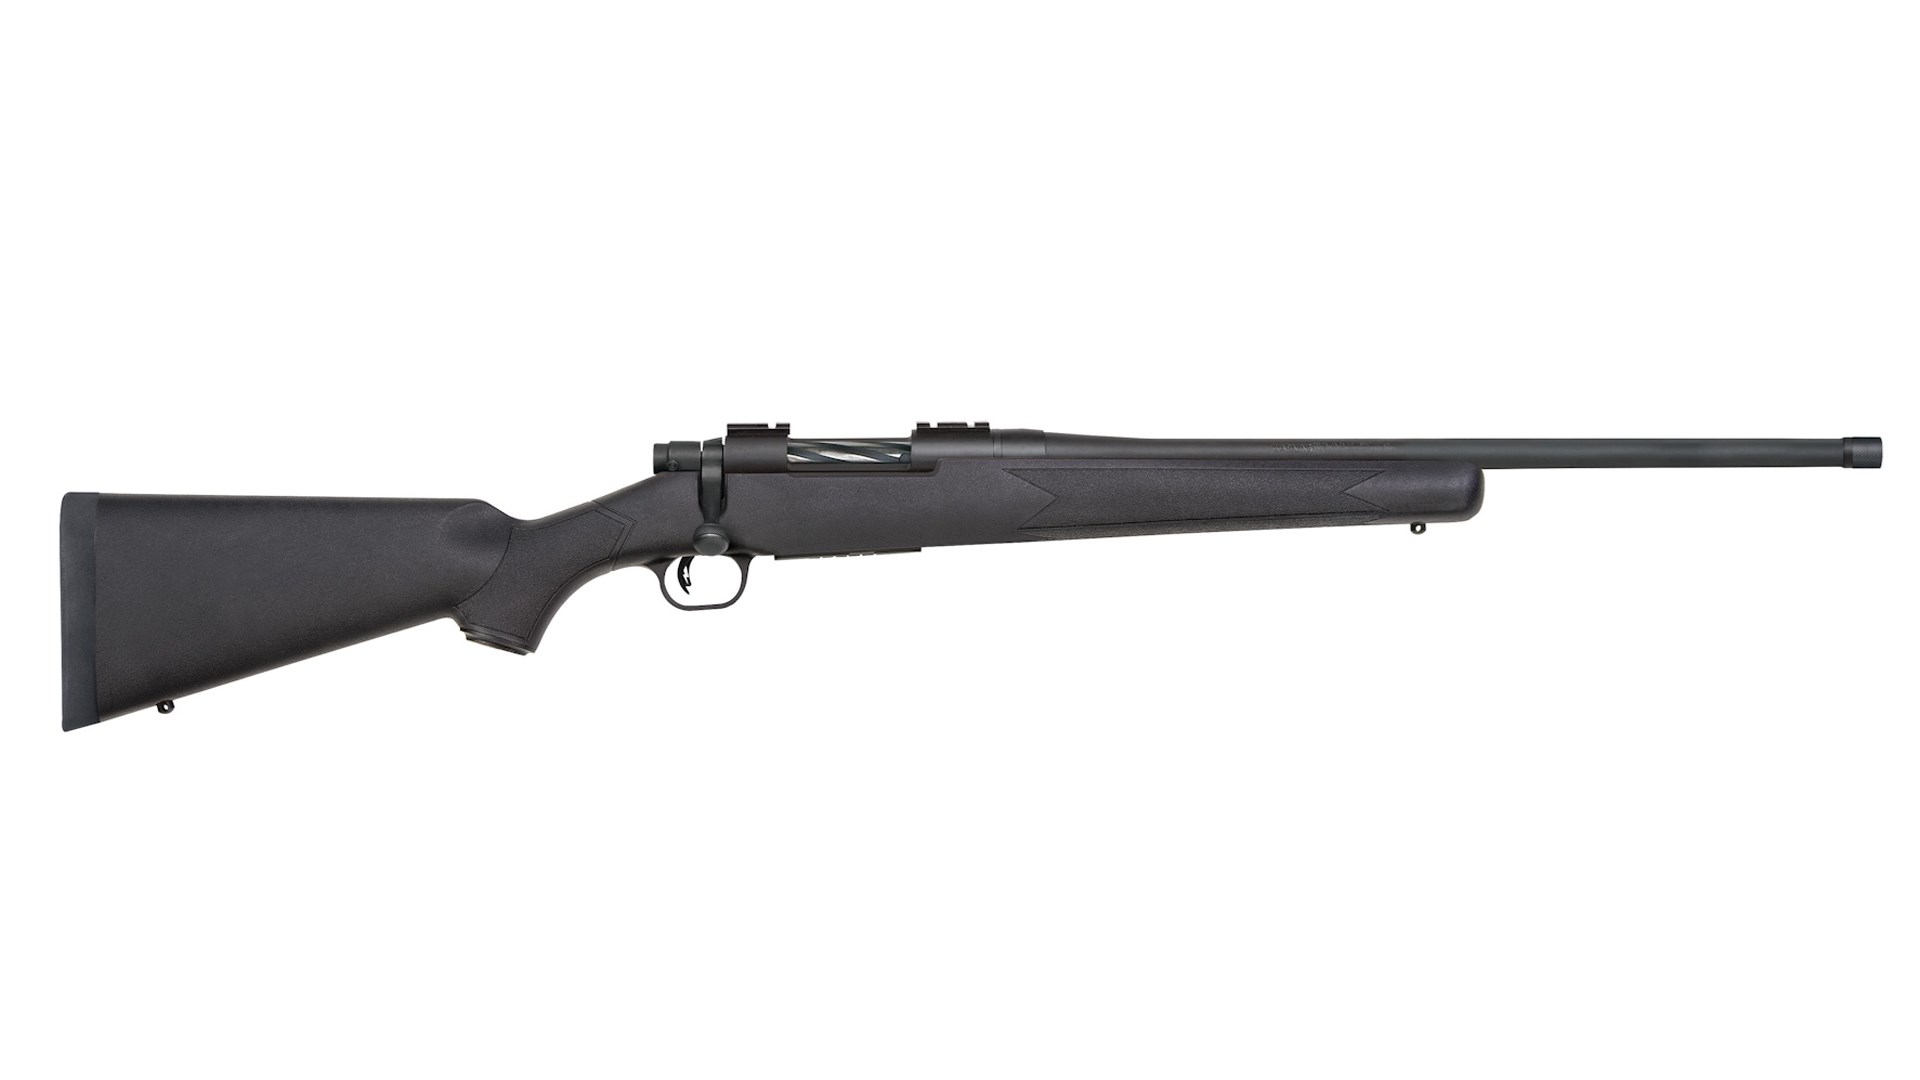 Right side of the synthetic-stocked Mossberg Patriot 400 Legend rifle.